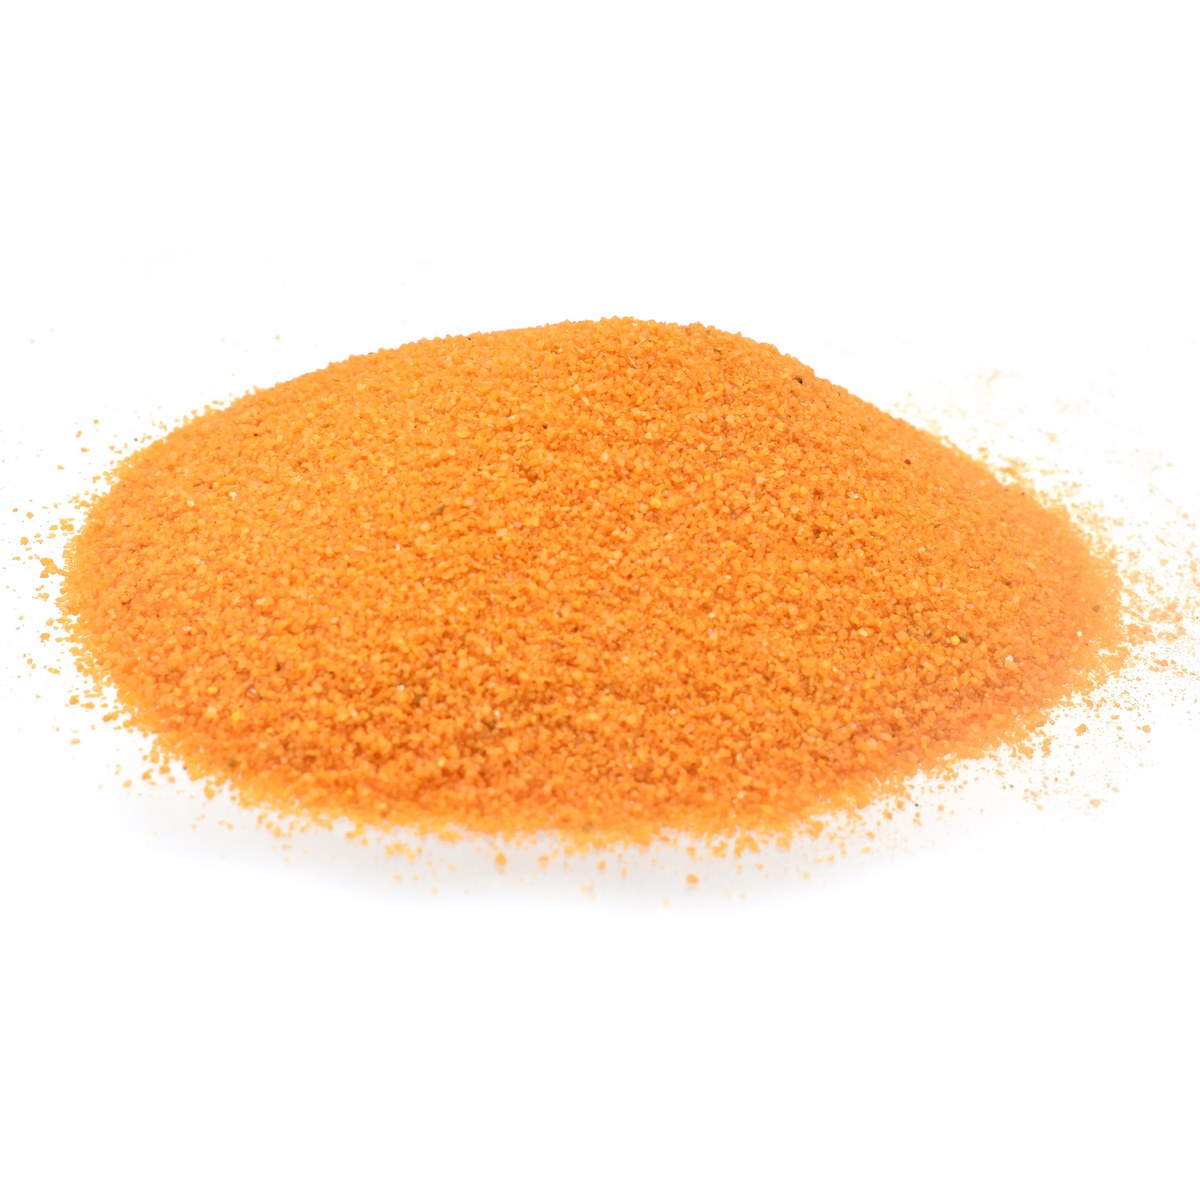 jags-mumbai Sand Jags Coloured Sand 160Gms Mango No.15 - Add a Bold and Bright Touch to Your Crafts and Decor